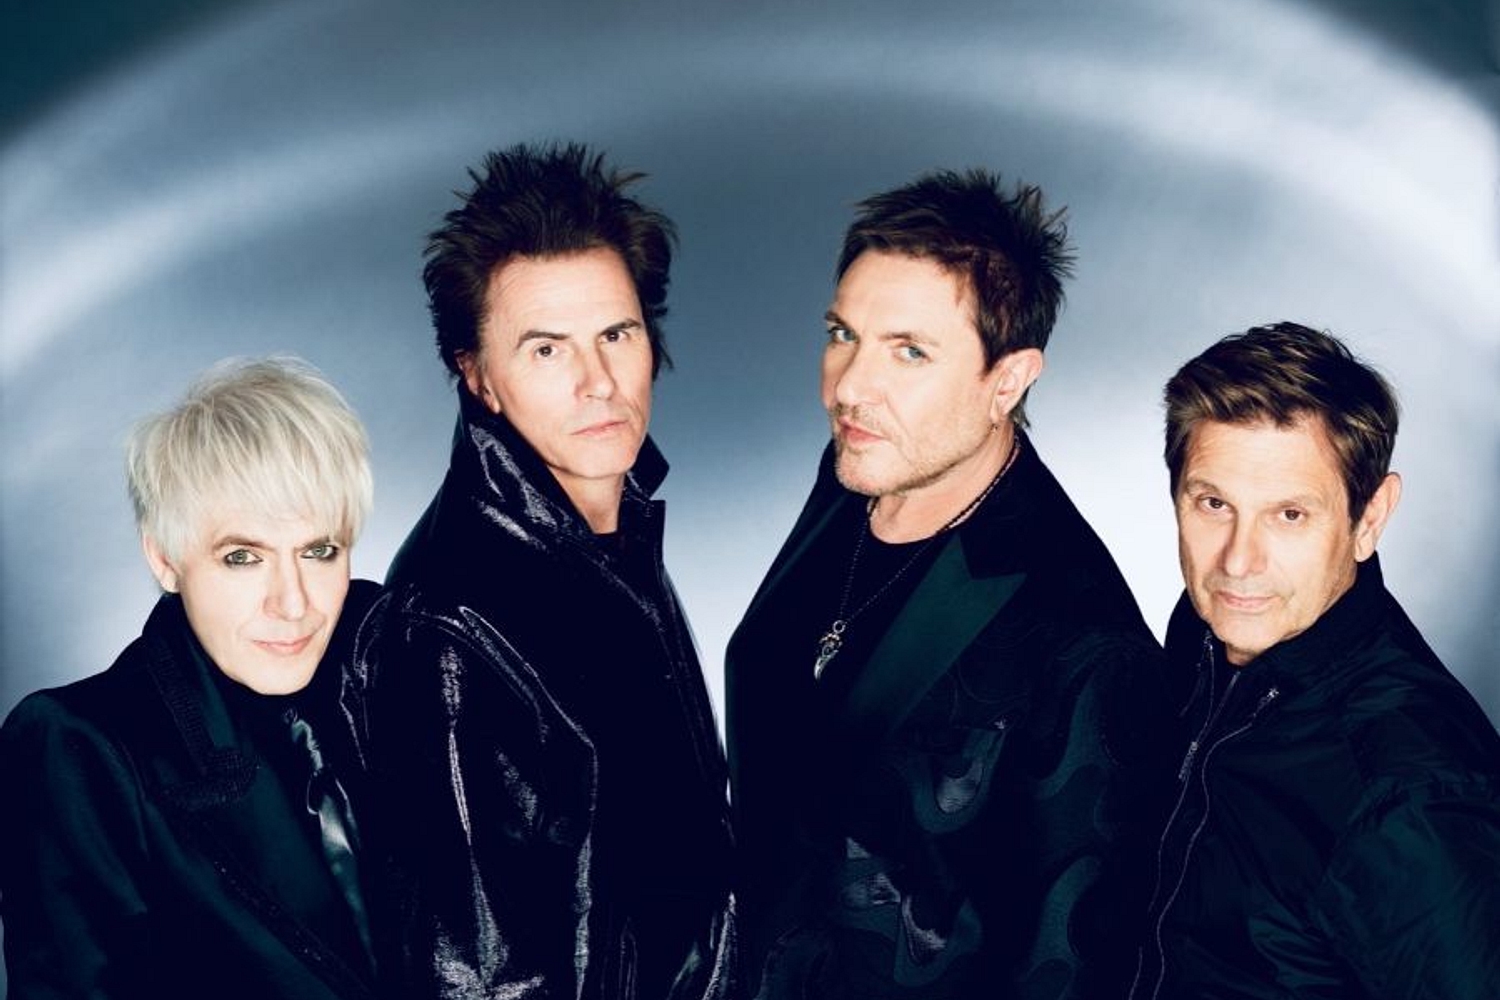 Duran Duran team up with CHAI for new track ‘More Joy’